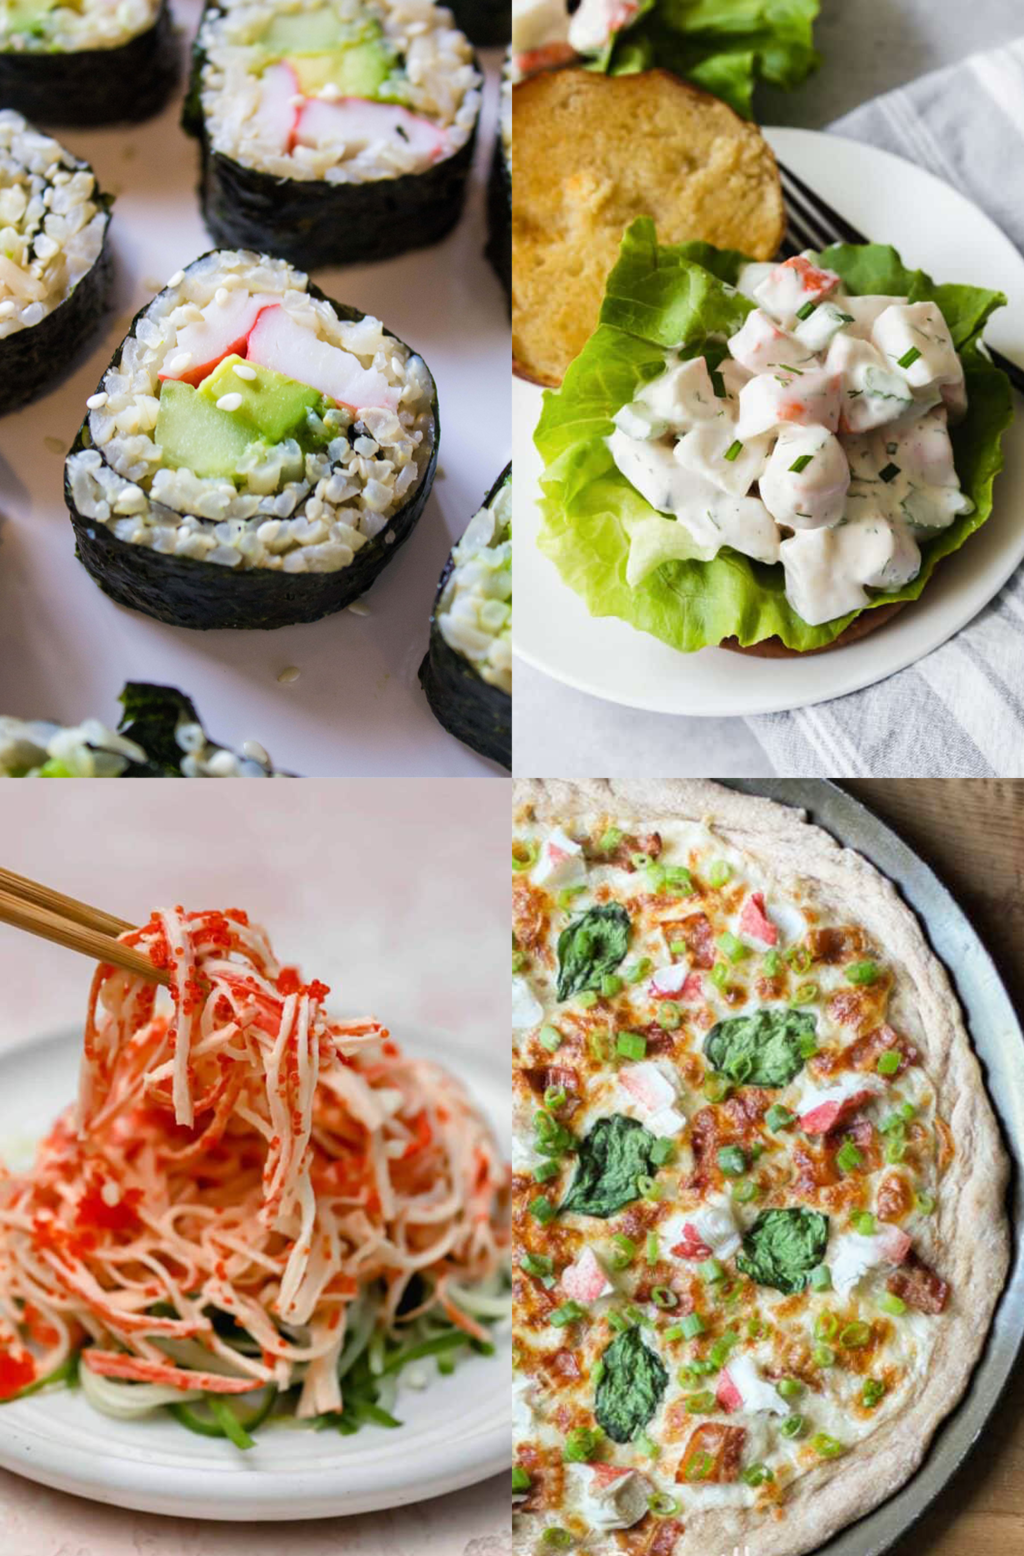 14 Imitation Crab Meat Recipes to Try